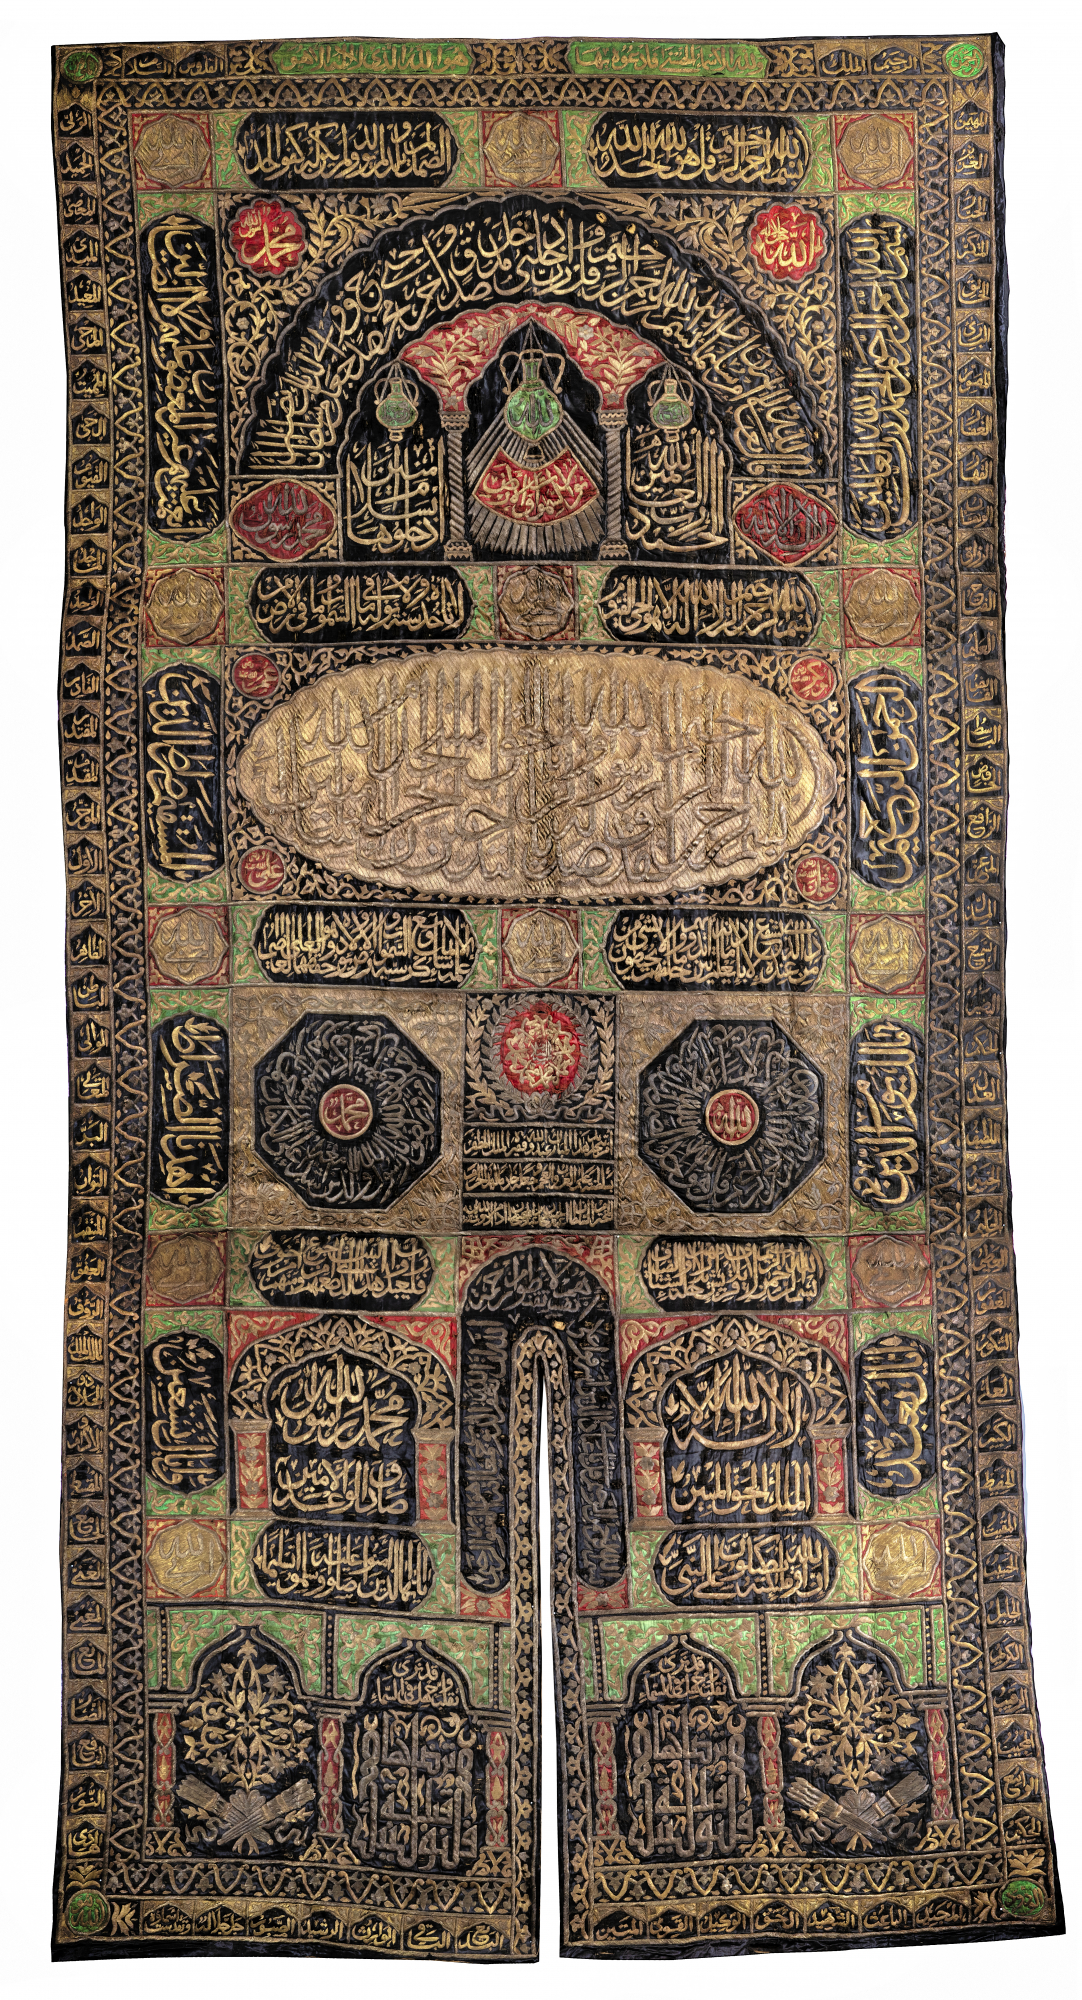 AN IMPORTANT OTTOMAN METAL-THREAD CURTAIN OF THE HOLY KAABA DOOR (BURQA), WITH THE NAME OF SULTAN AB